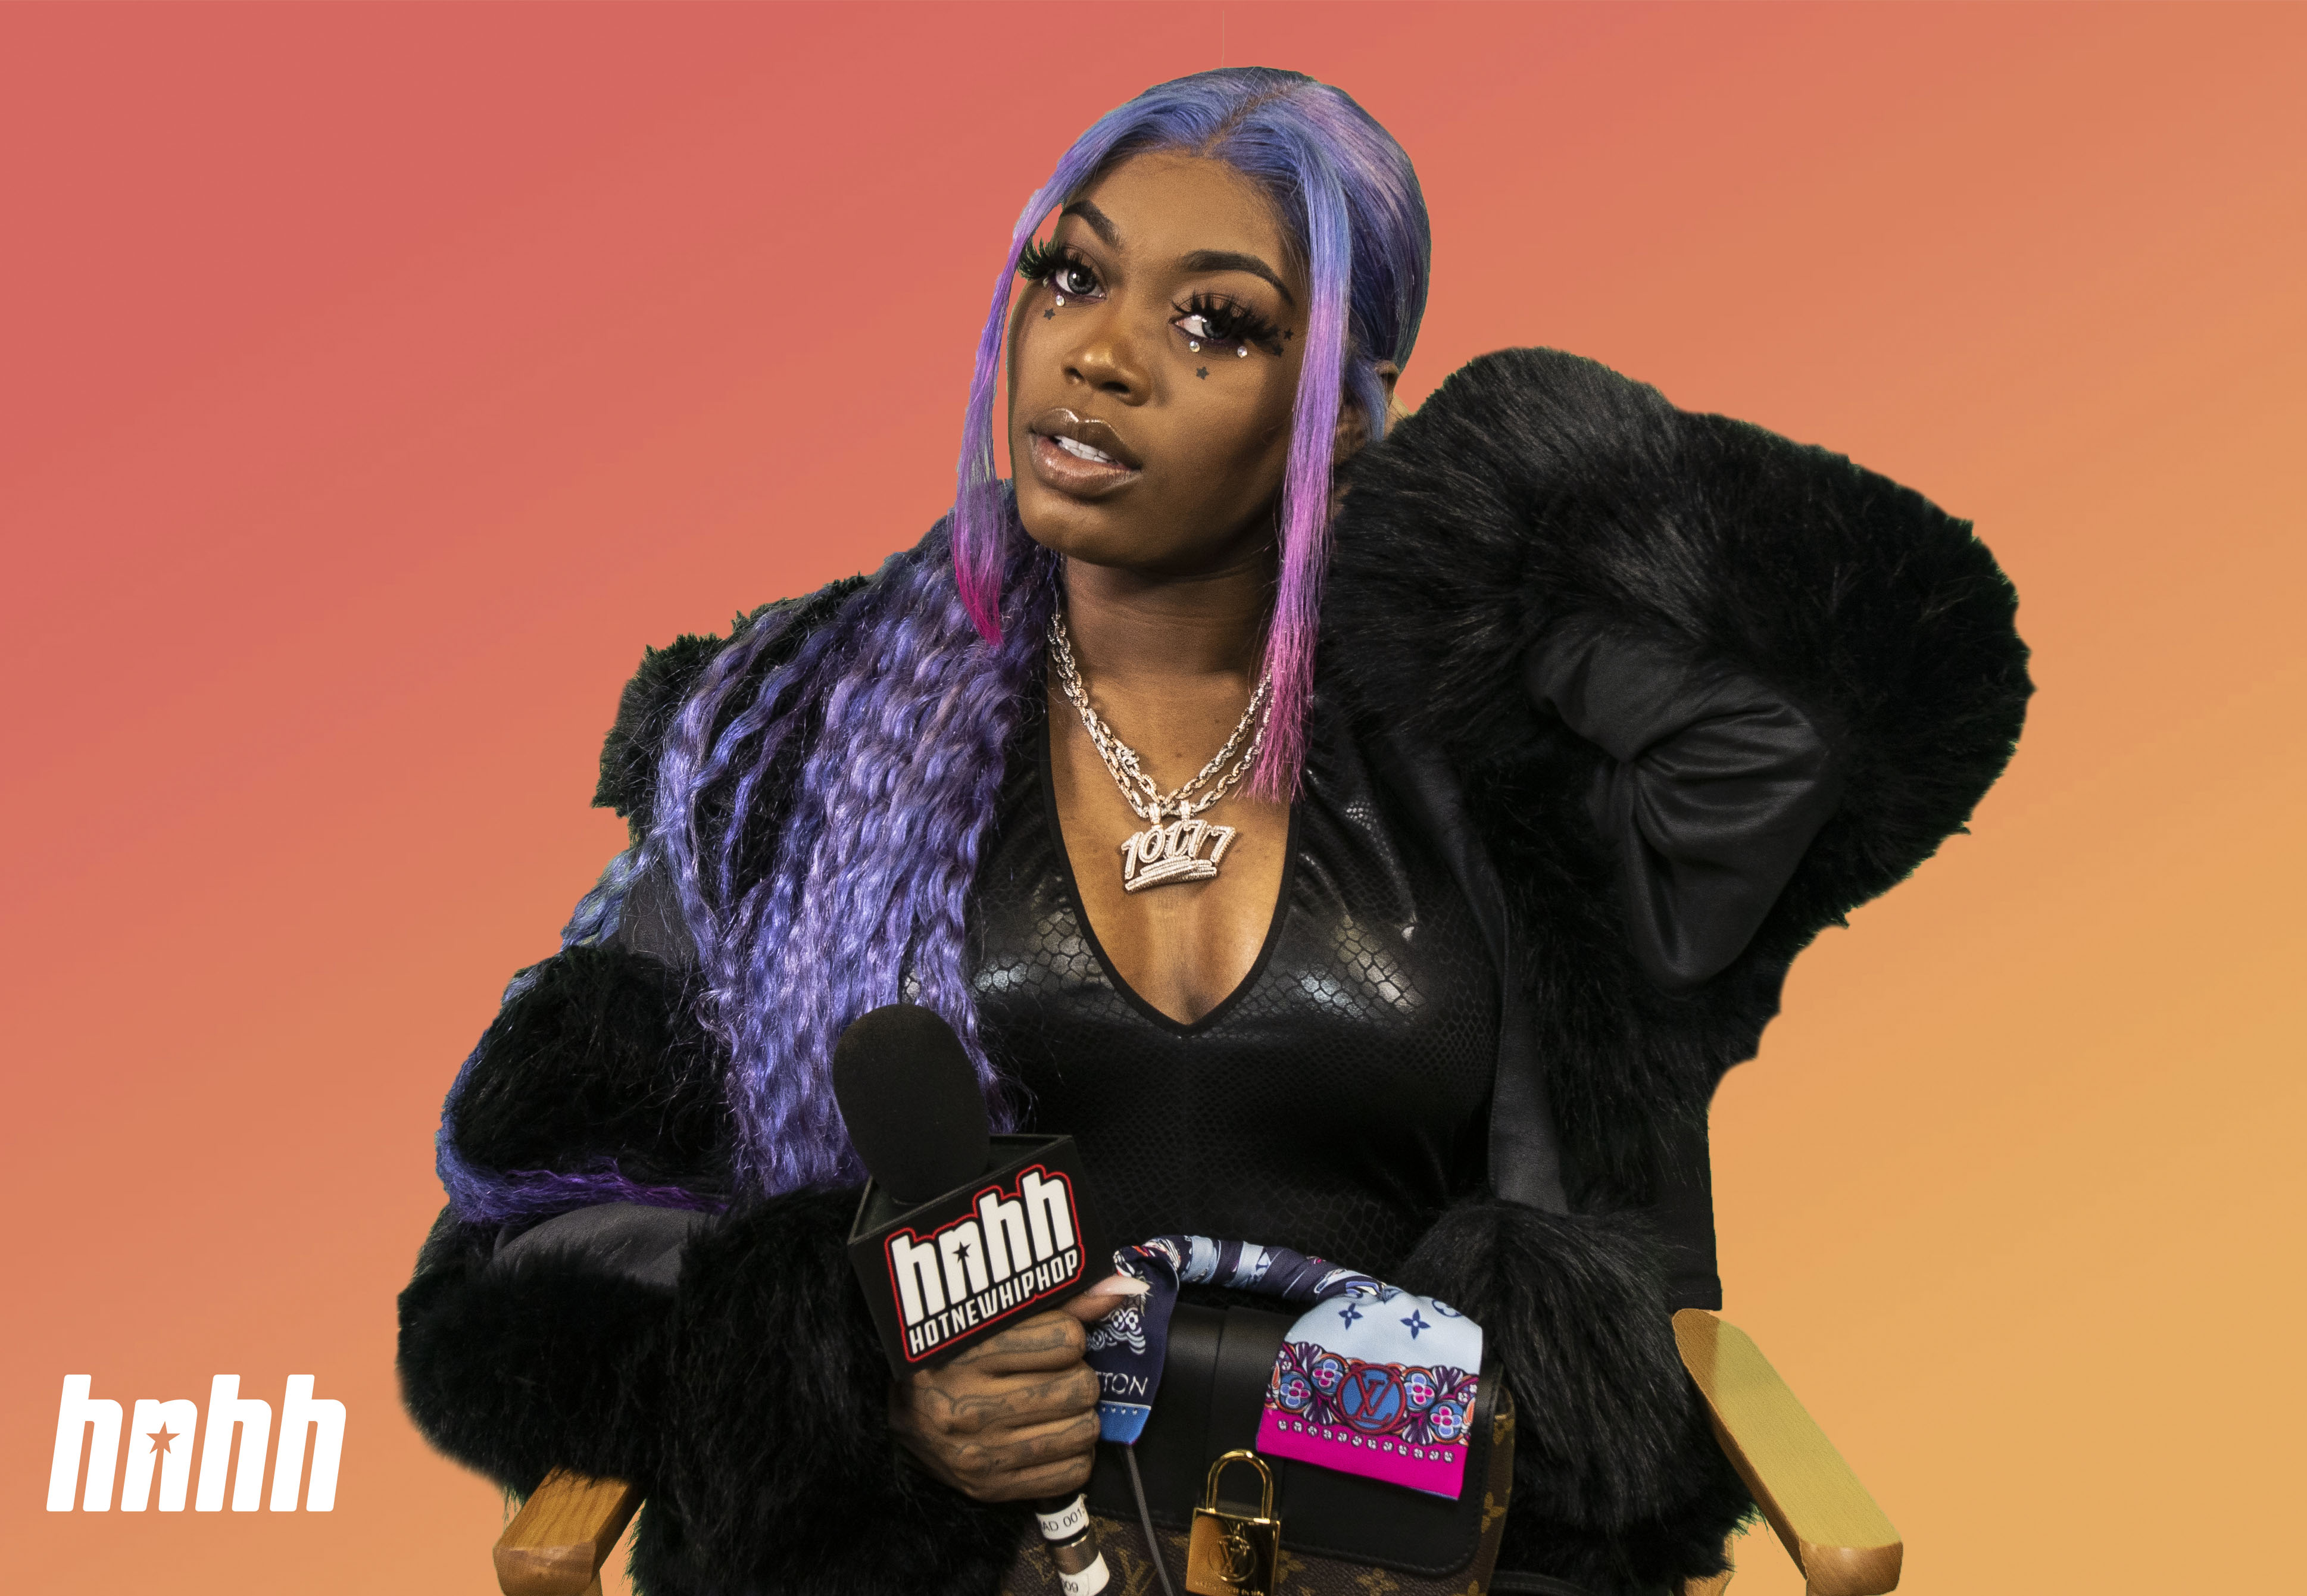 Asian Doll Says She’s At Her “Final Stage Of Grief”